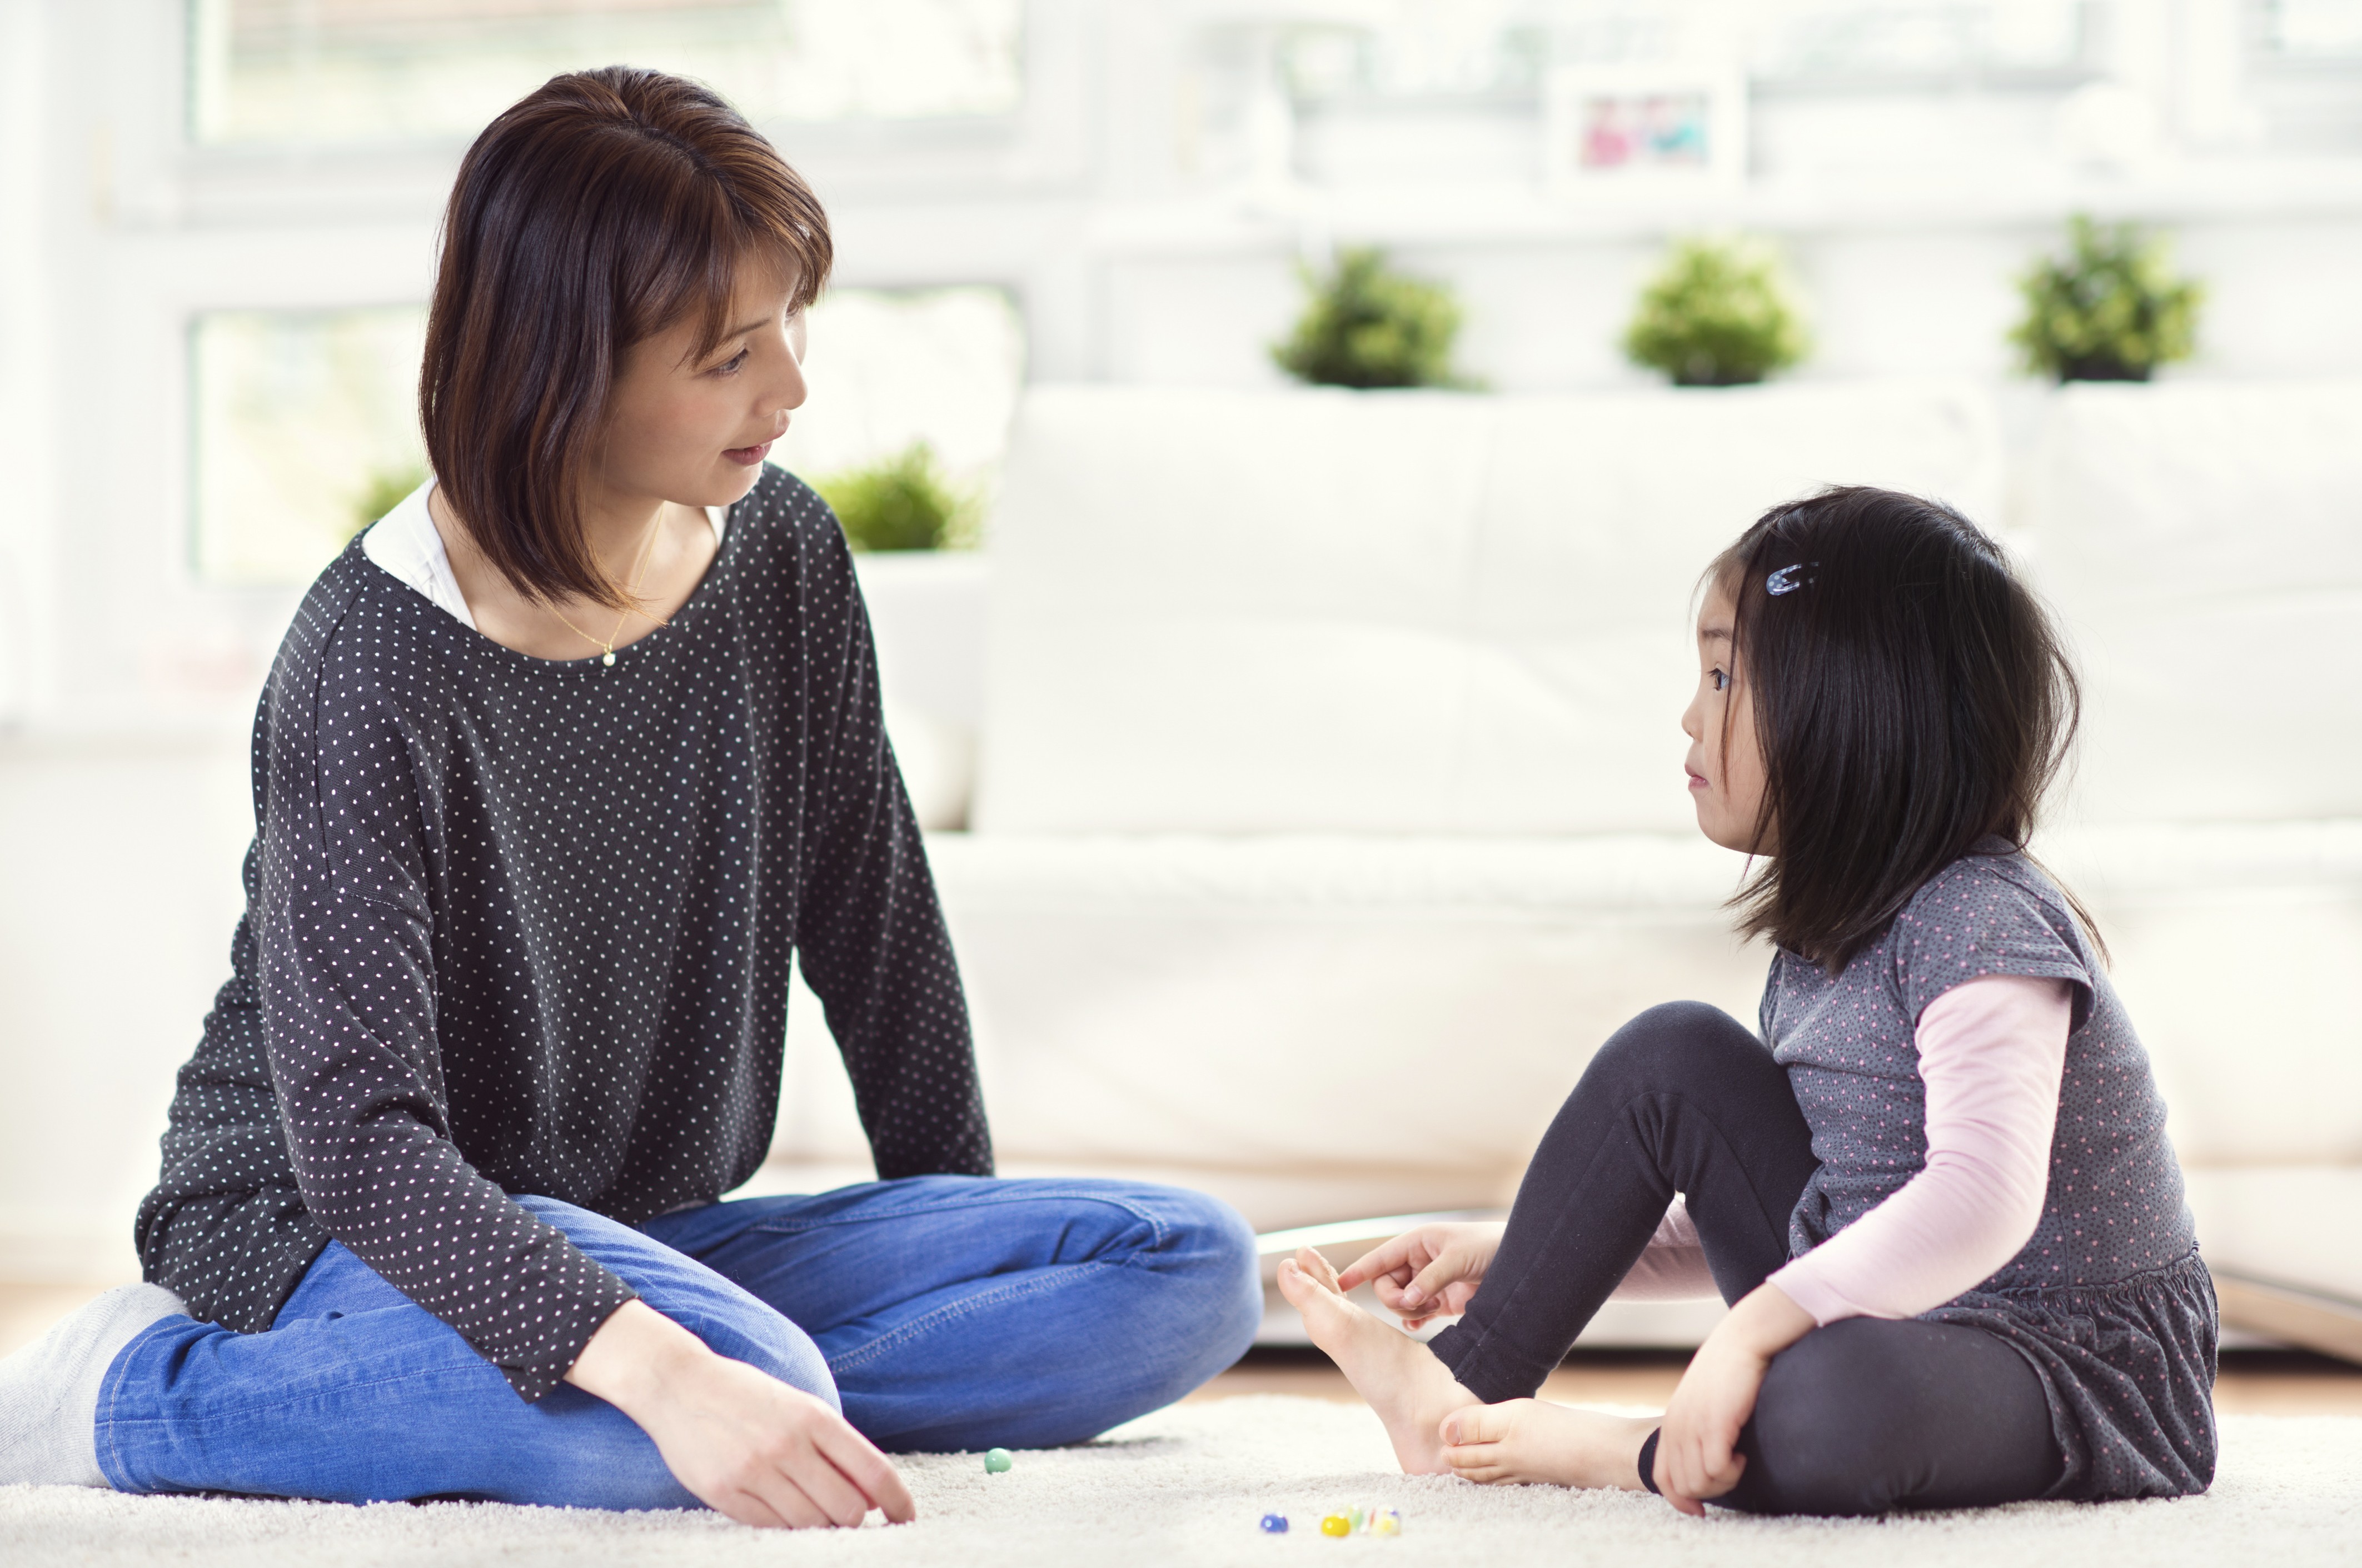 Parents should spend more time talking to their child to find out about their school life. Photo: Shutterstock